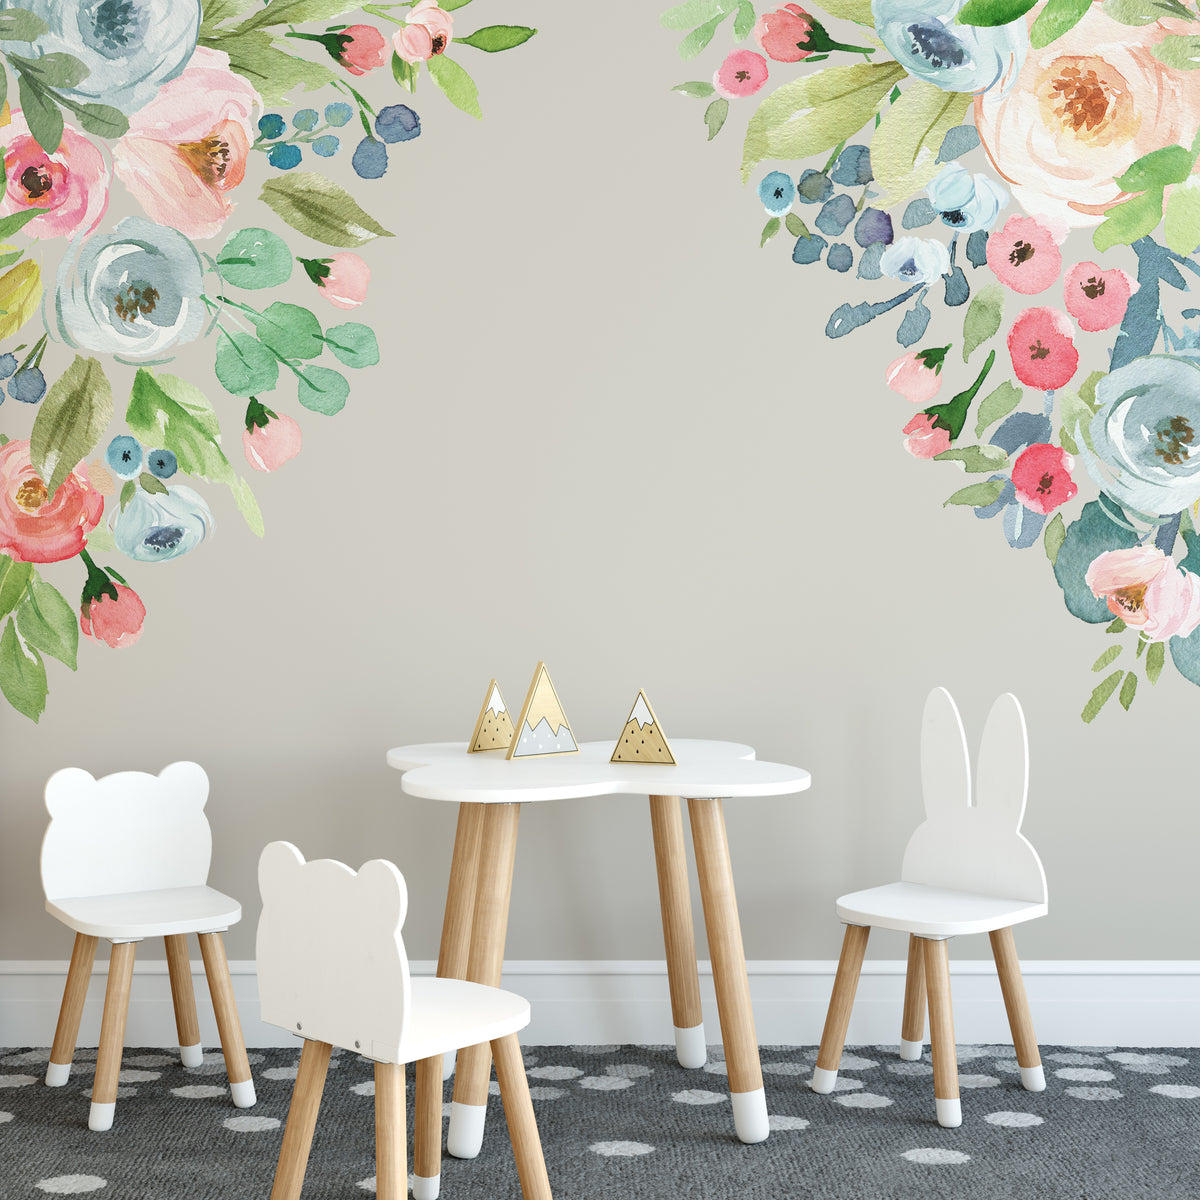 Floral Wall Decal Corners DANY Watercolor Flowers Decal Girl